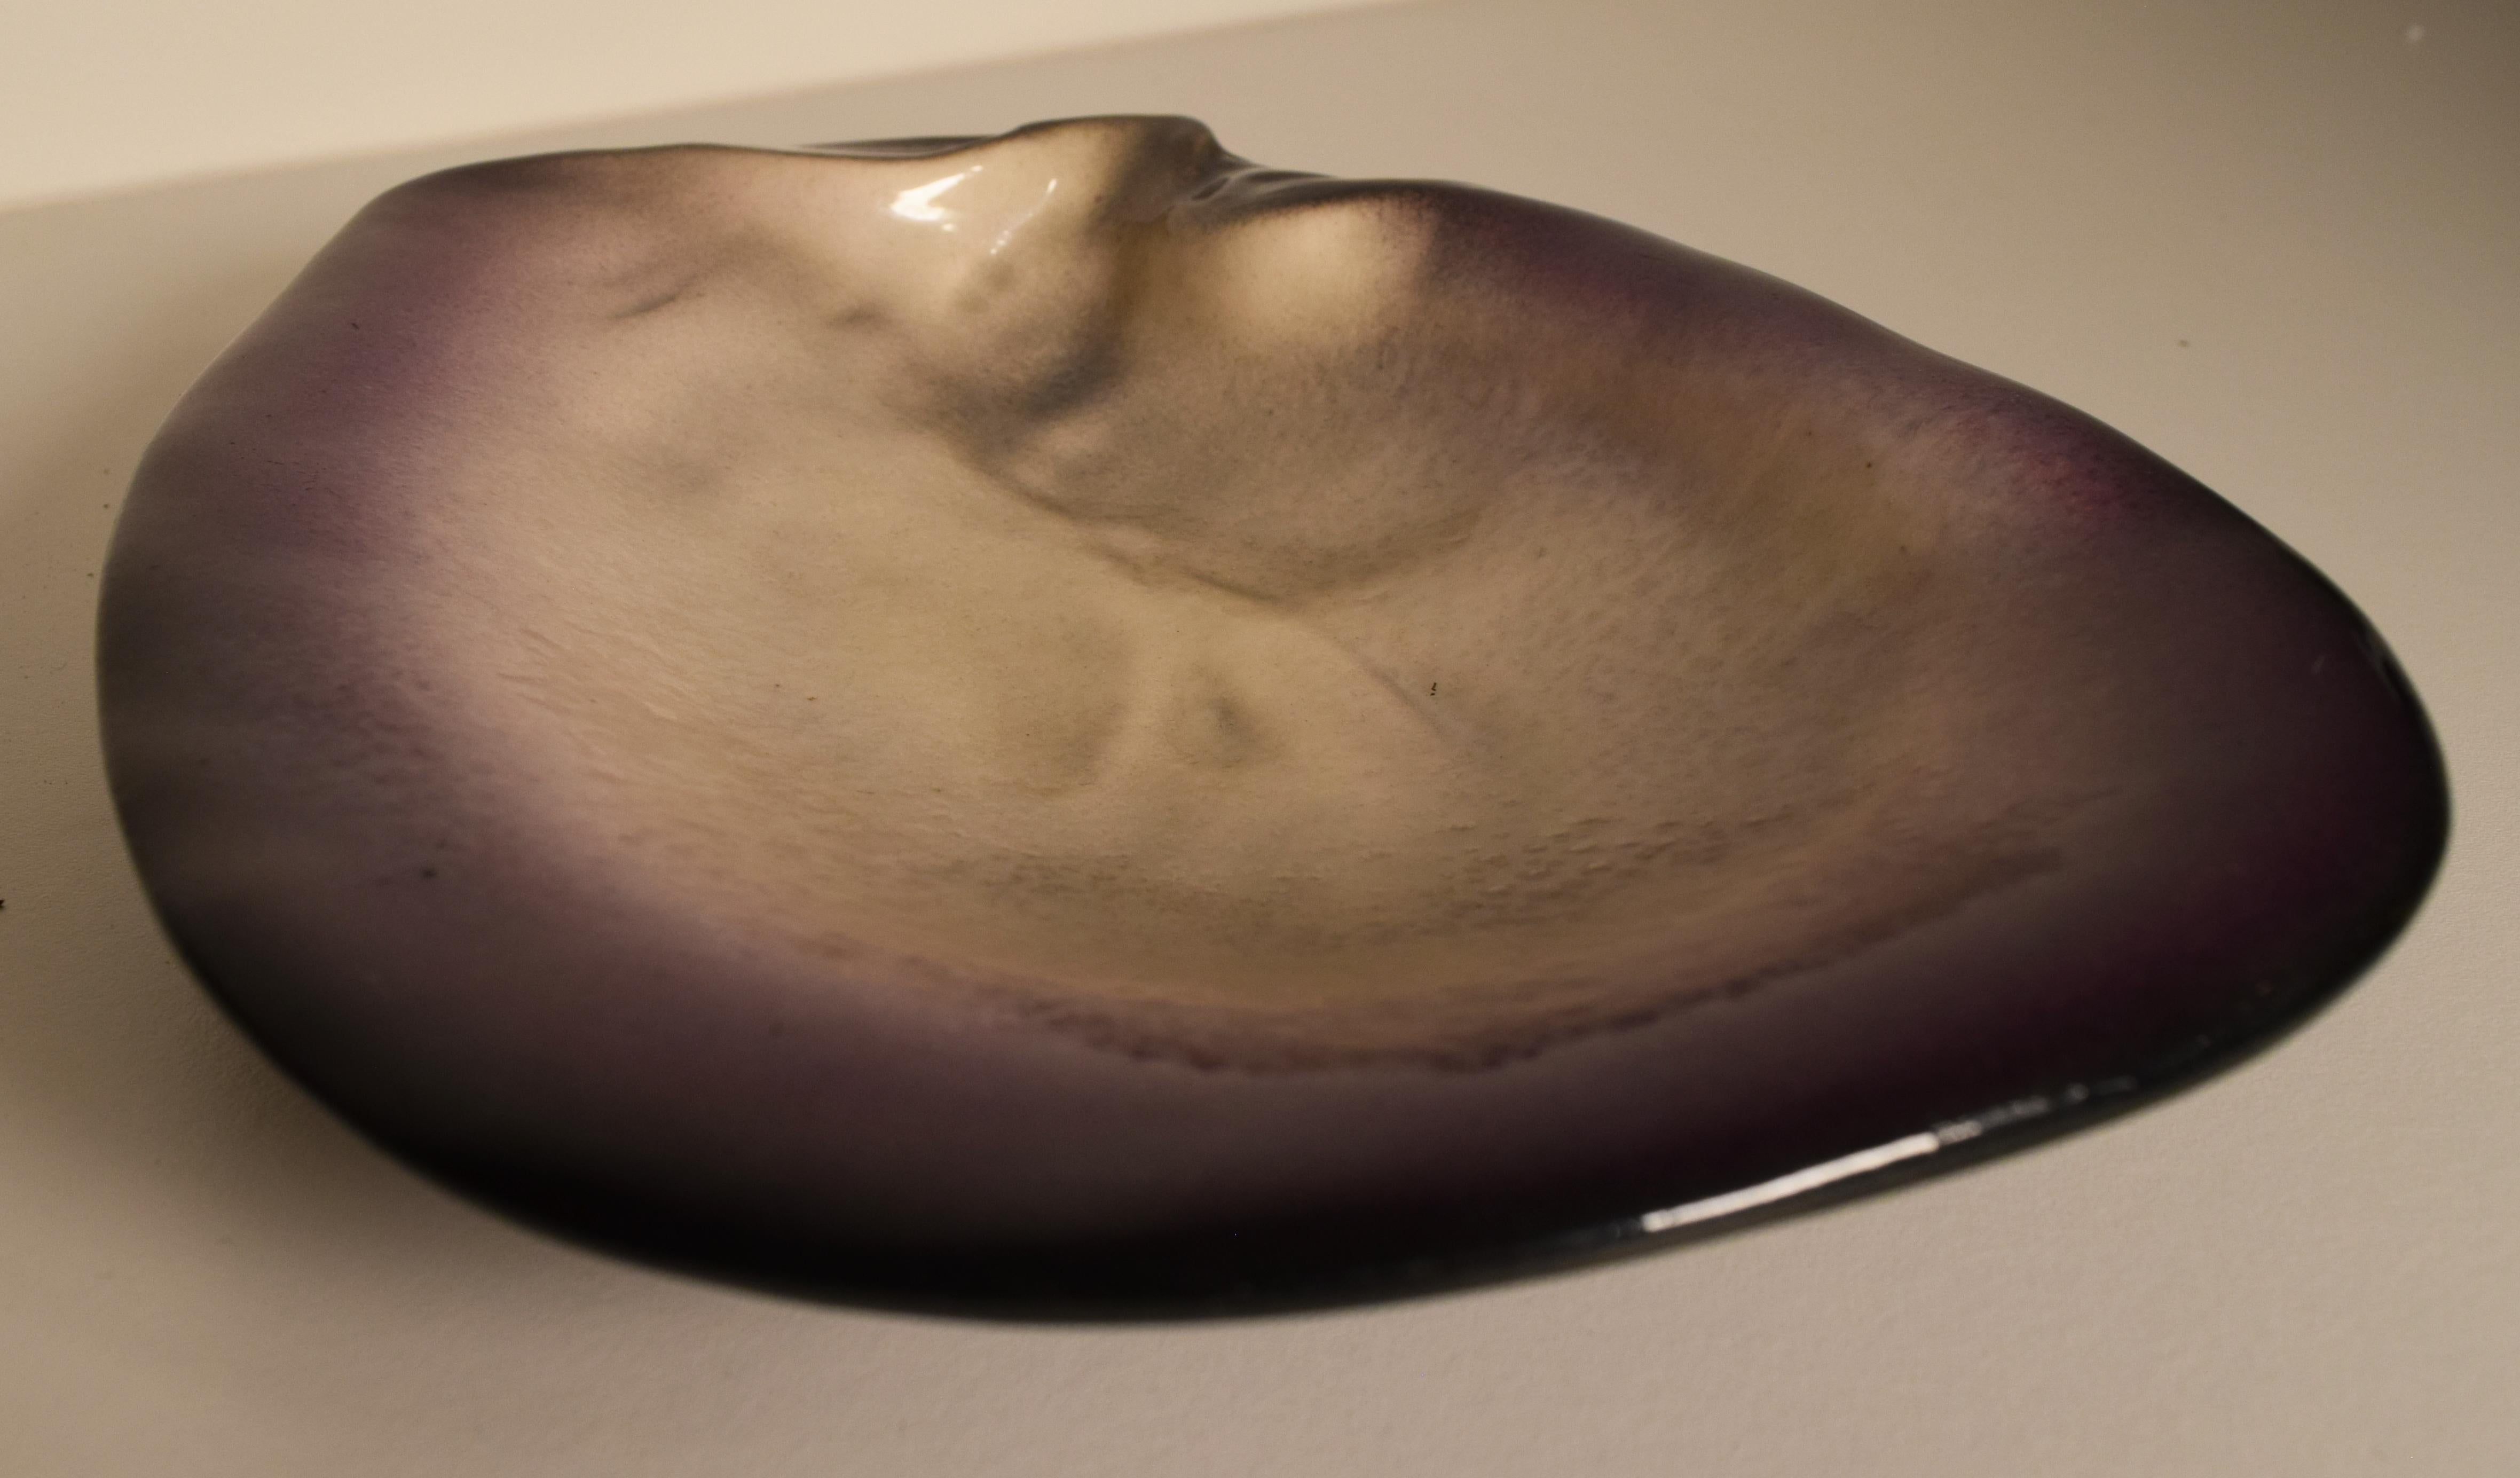 Abstract dish or plate by Pol Chambost, circa 1970. Signed to underside and in perfect condition with white and purple colors. 9